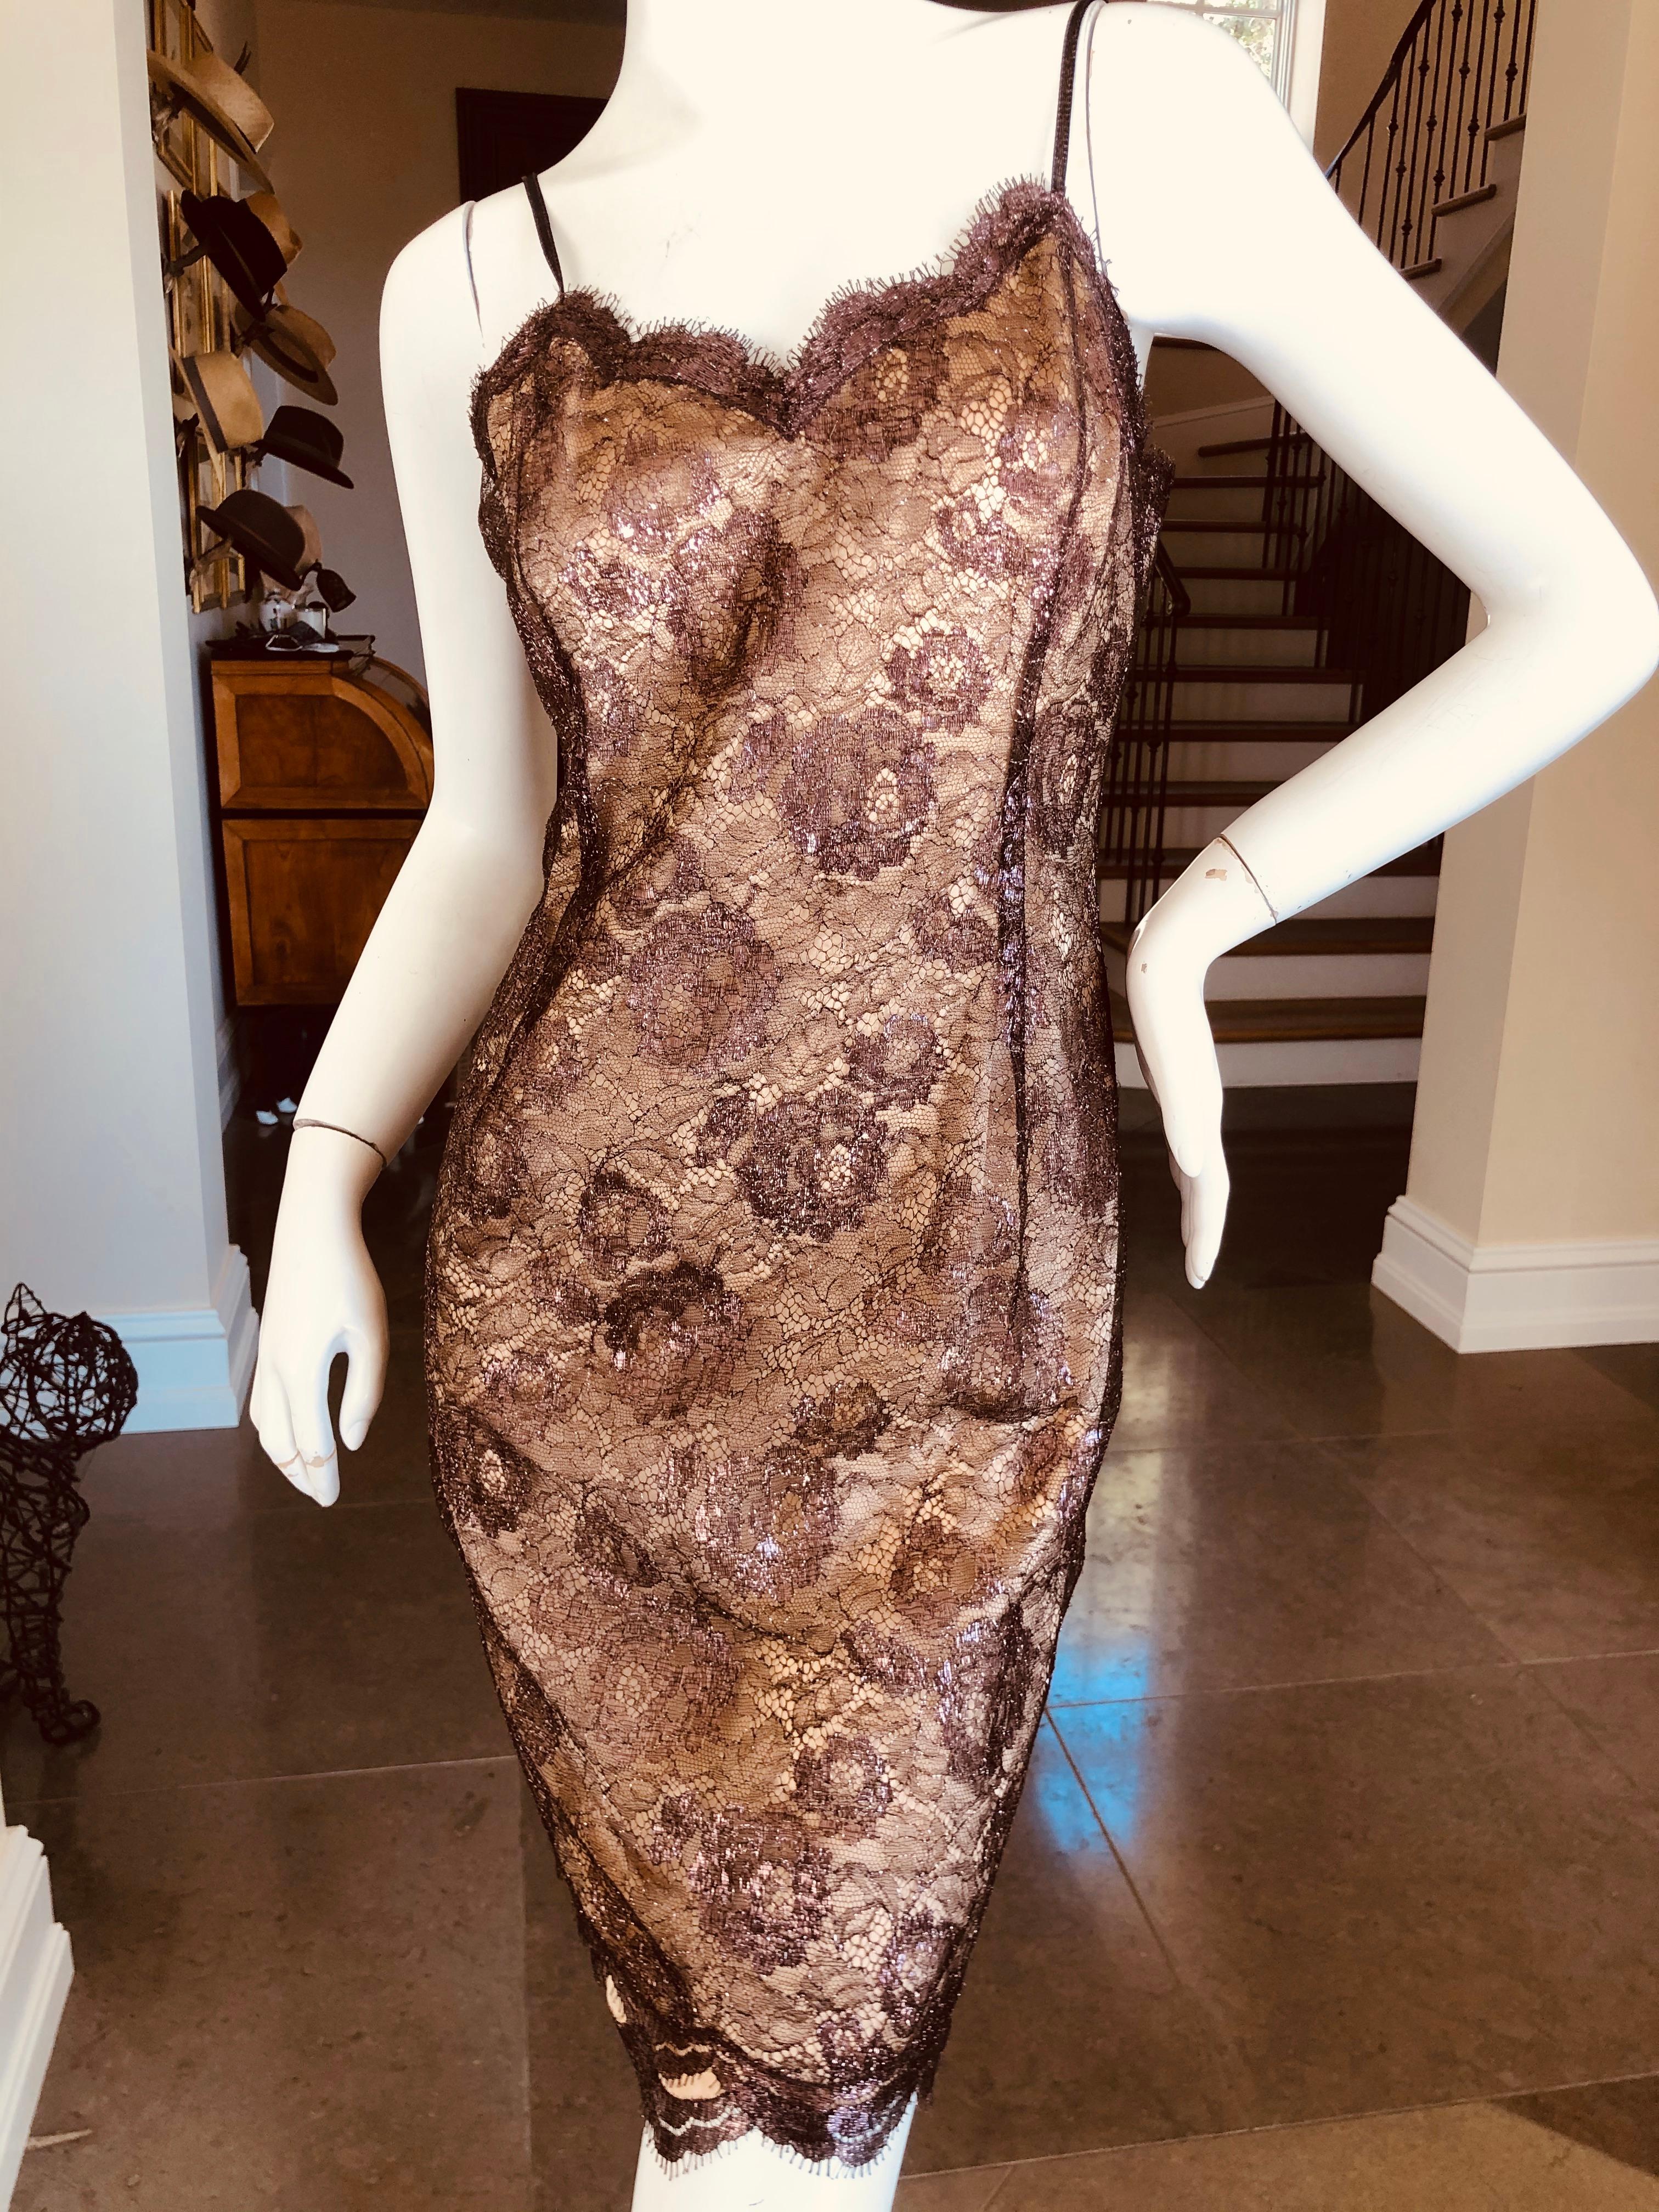 Geoffrey Beene Vintage Metallic Accented Lace Dress with Scallop Edges.
There are two layers, the sheer metallic lace, and a nude under dress . Both layers have a scalloped hemline, a Beene signature.
Wide leather belt was shown with this dress, I